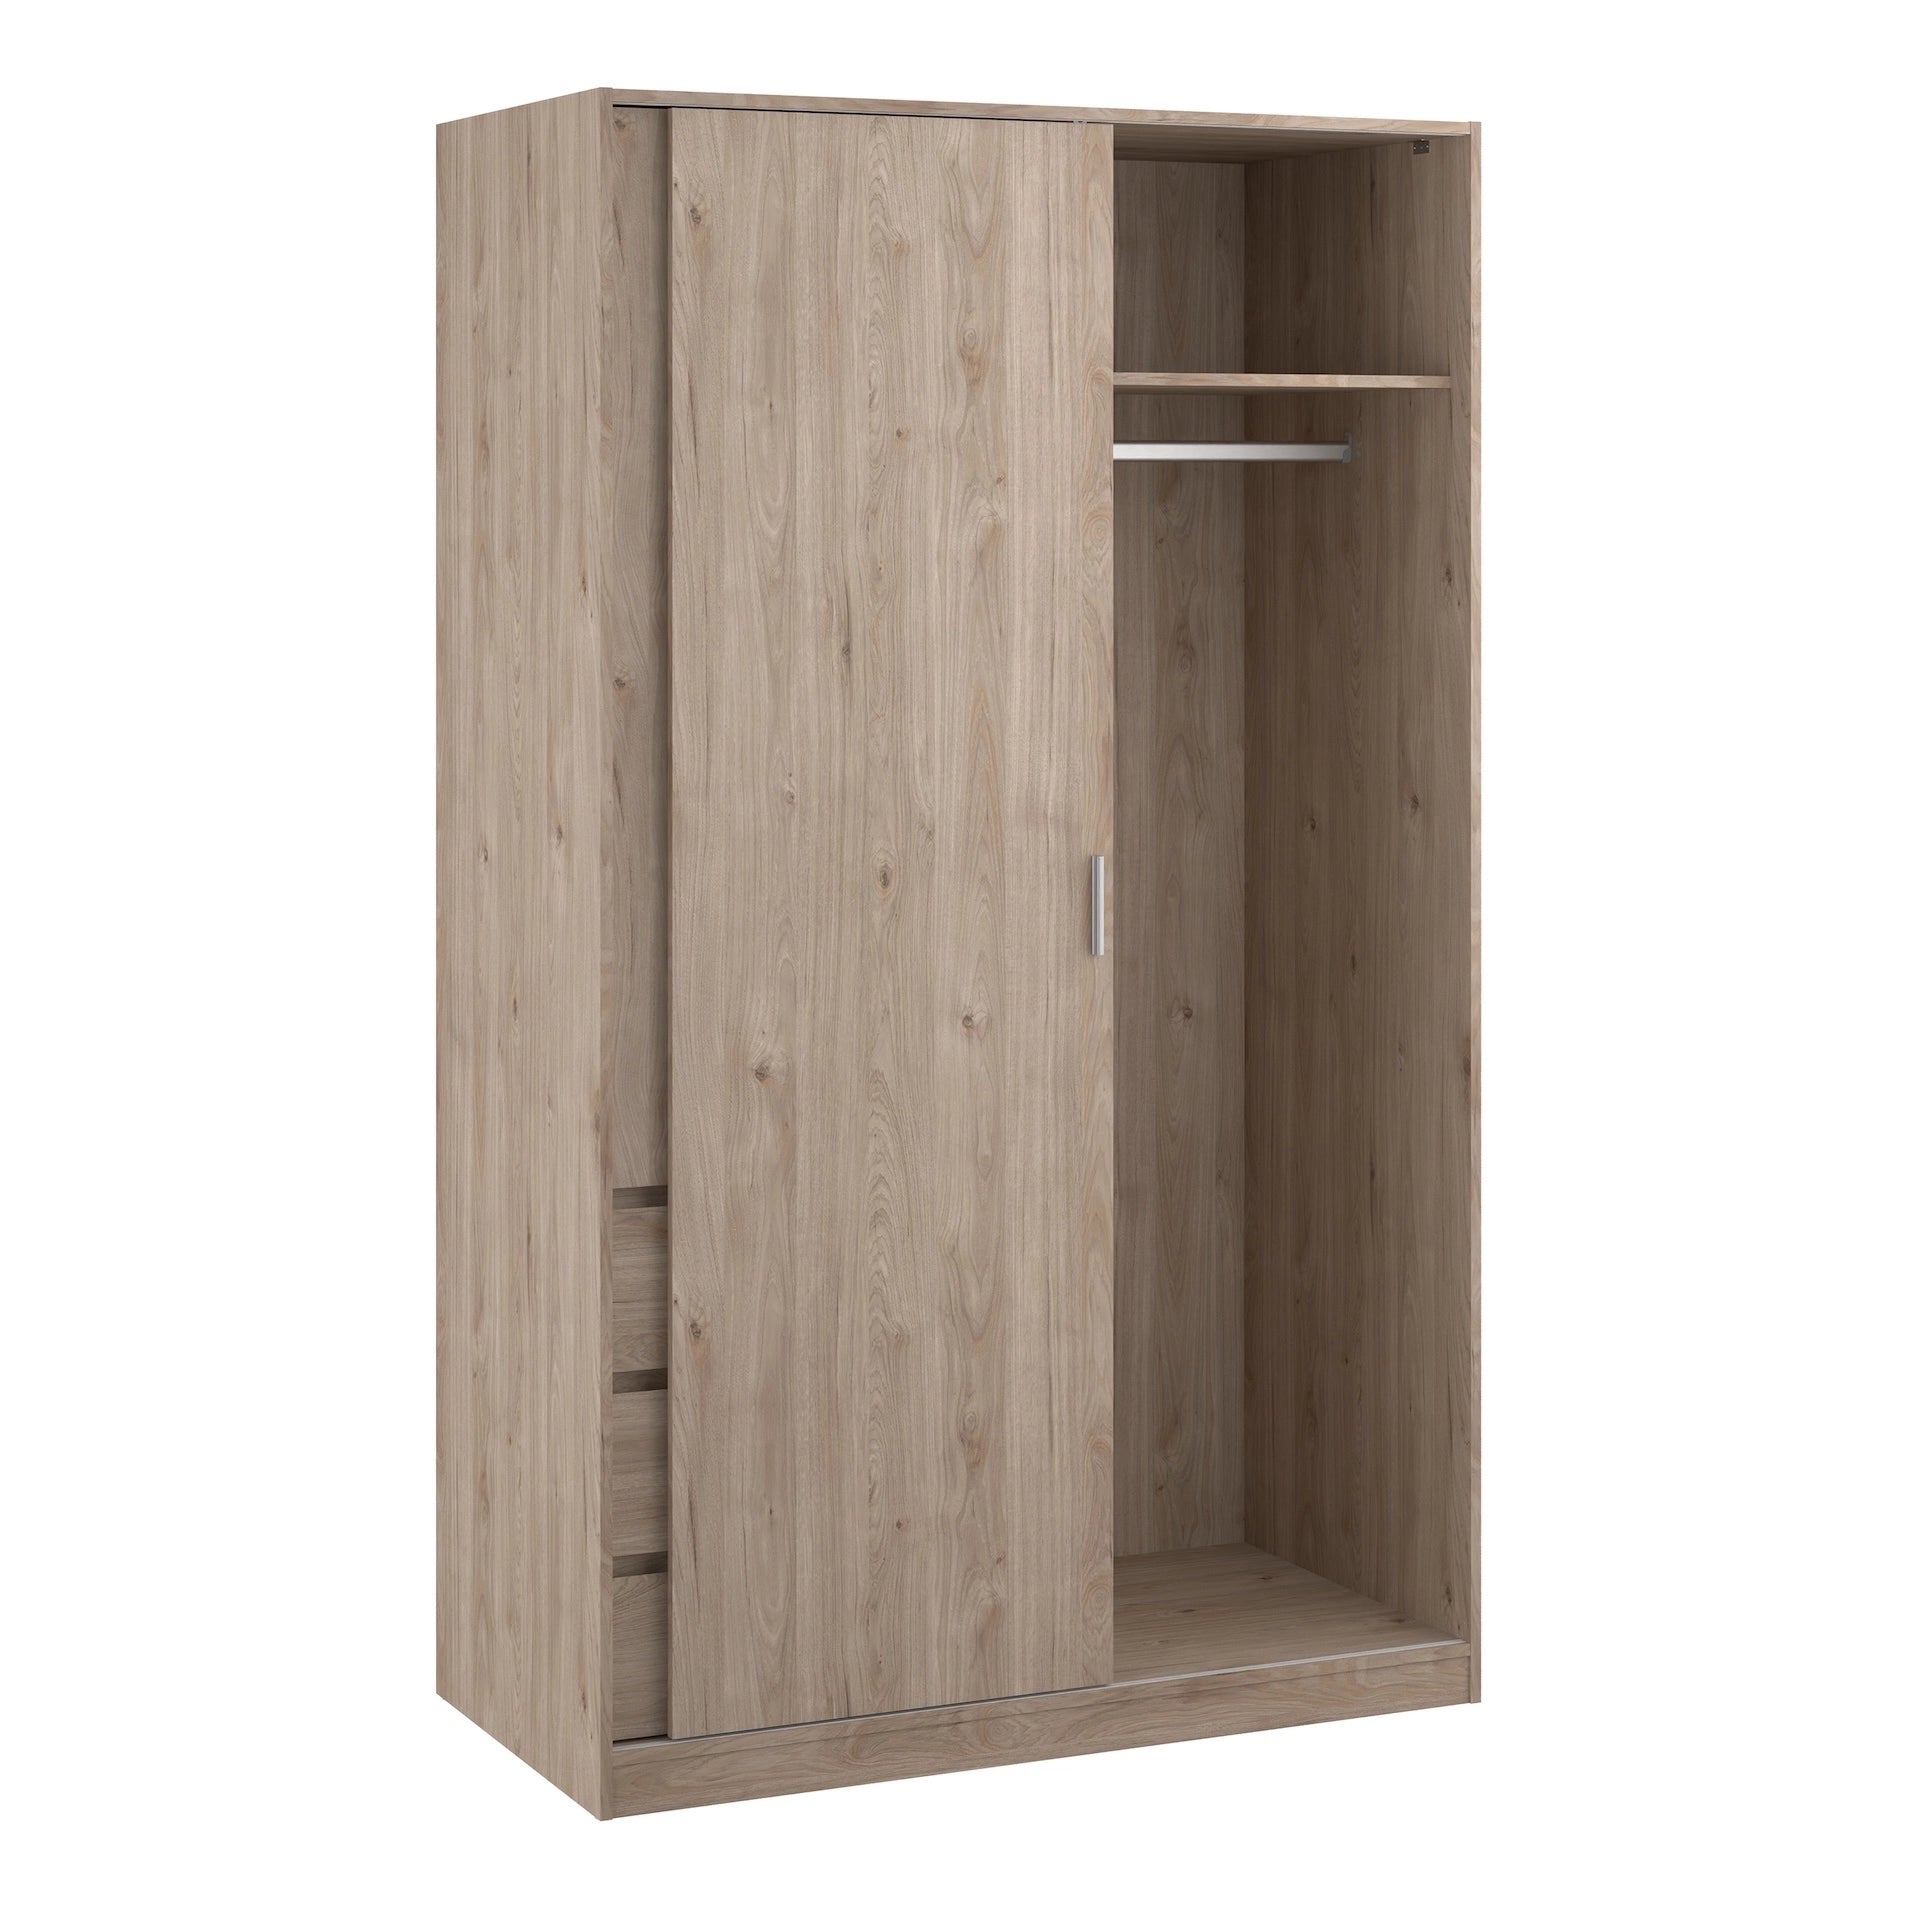 Furniture To Go Naia Wardrobe with 1 Sliding Door + 1 Door + 3 Drawers in Oak Structure Jackson Hickory